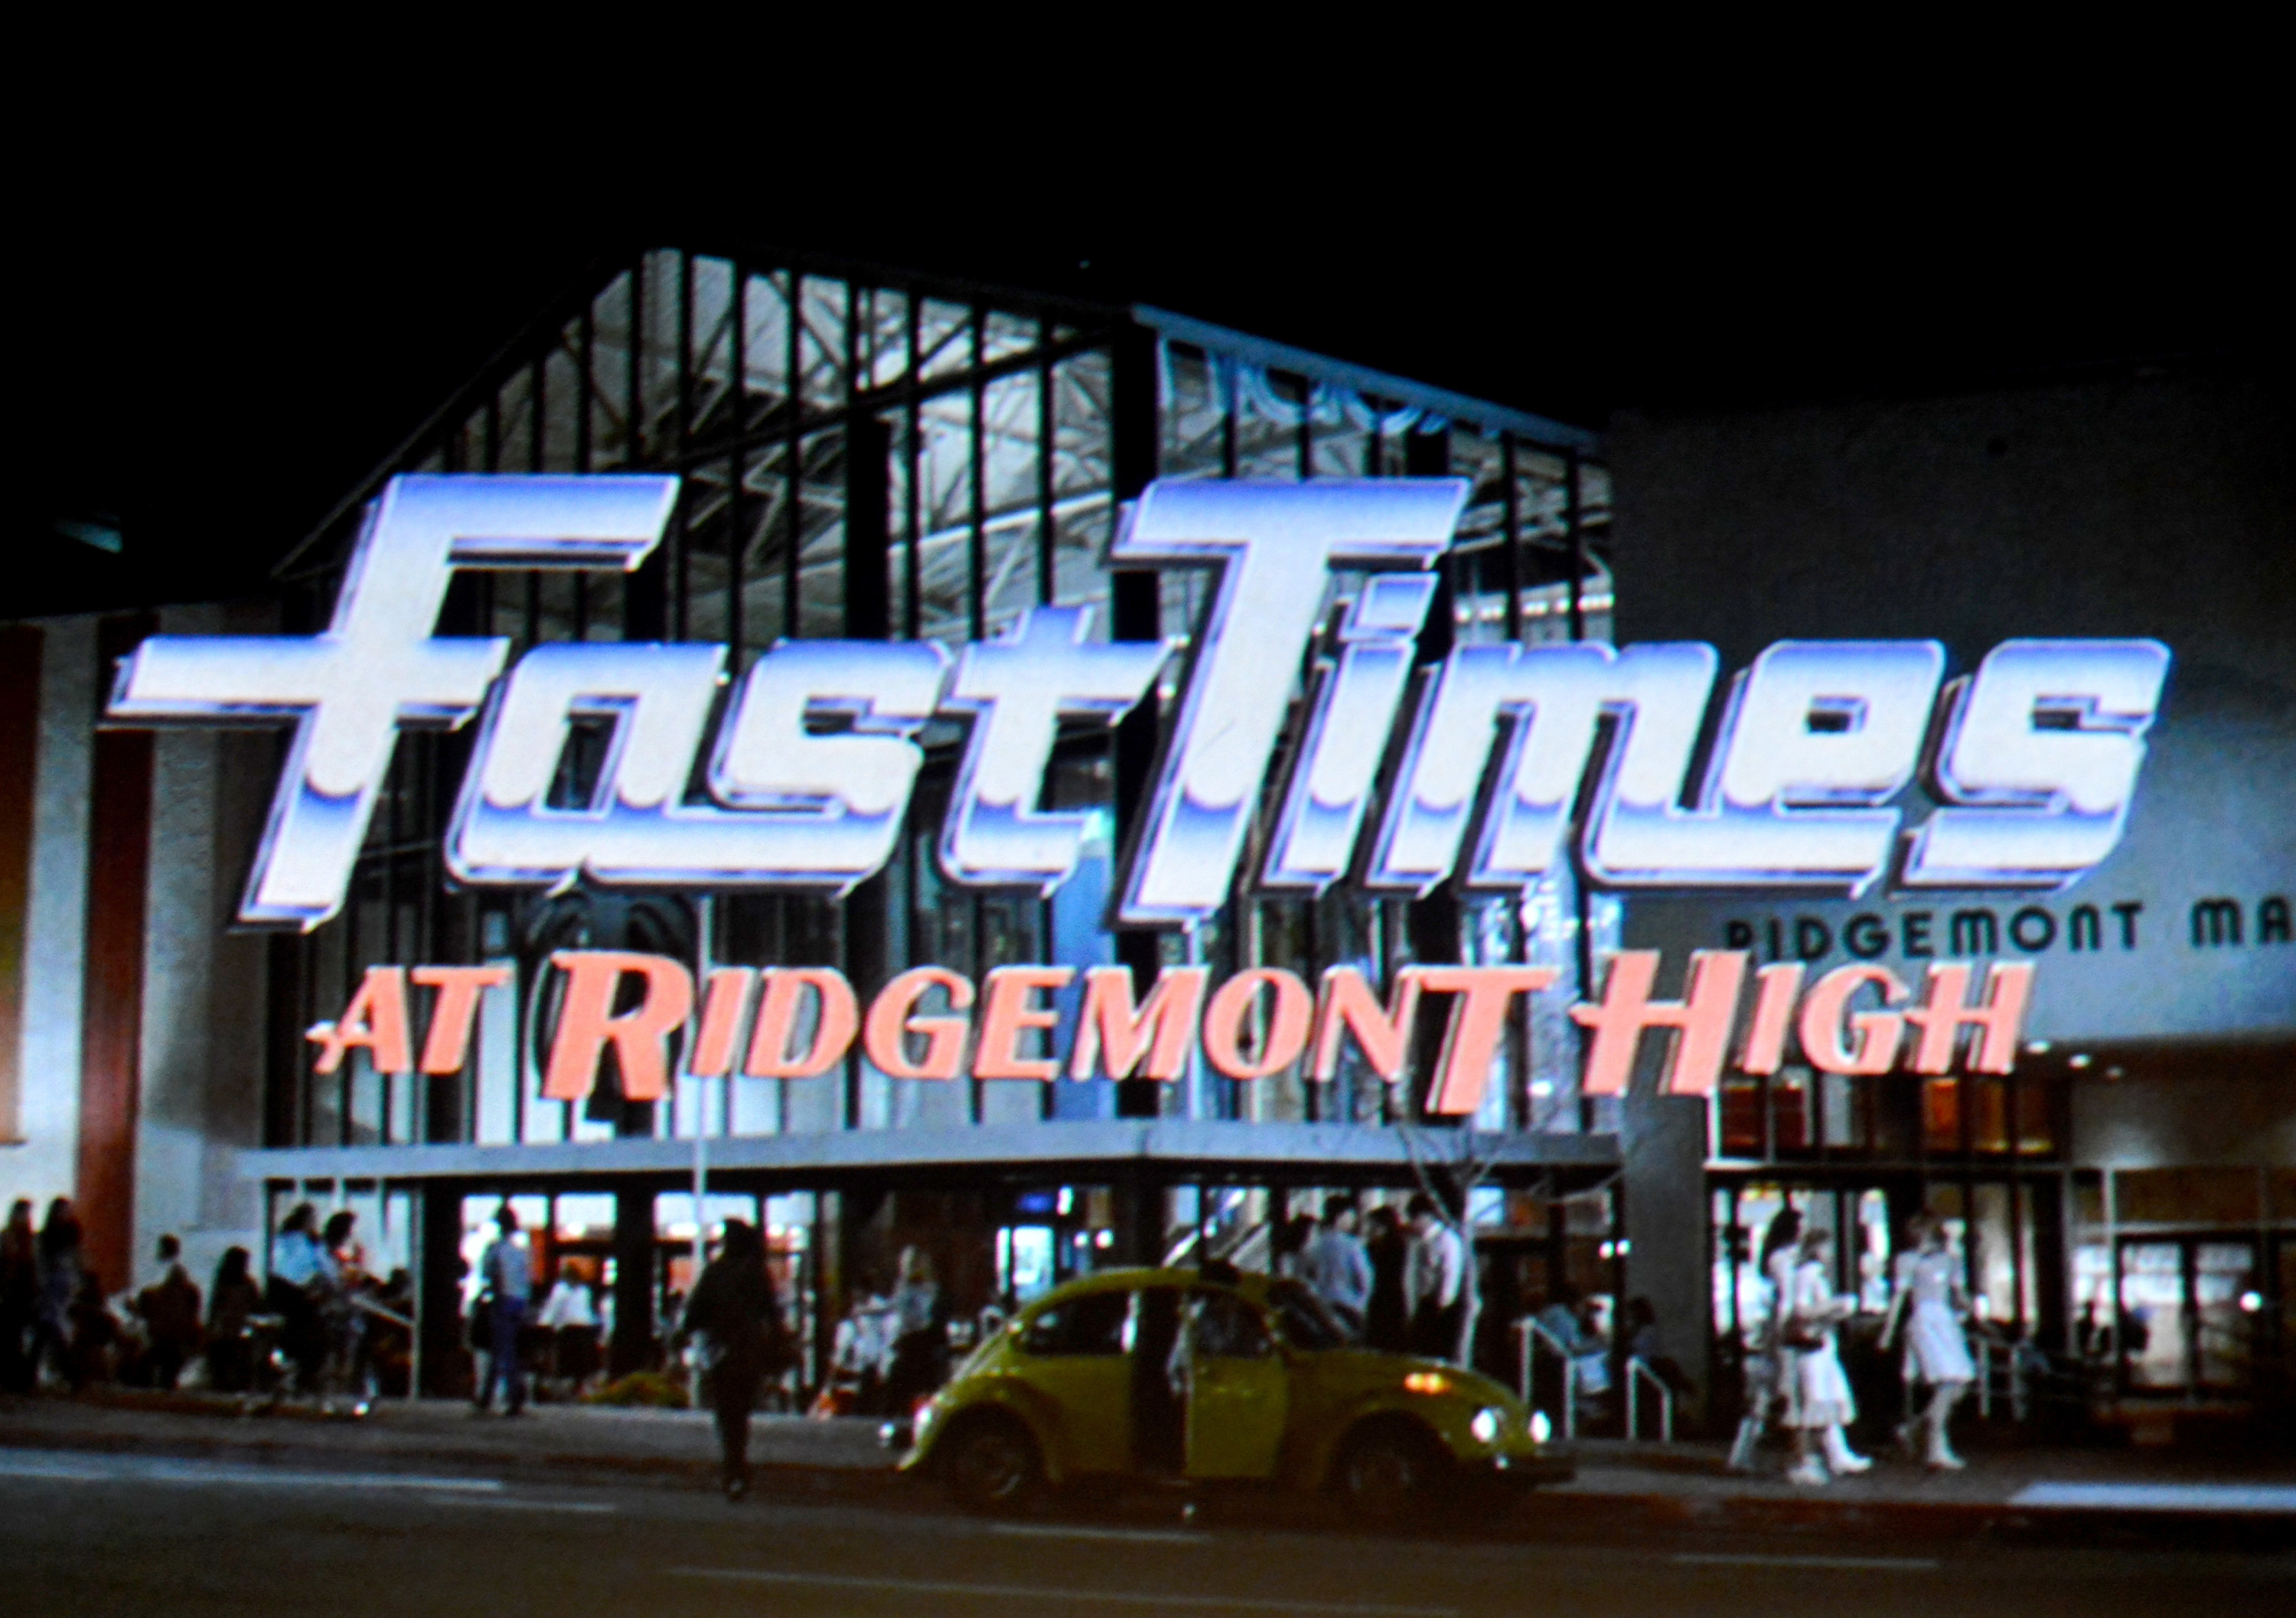 The opening title card of Fast Times at Ridgemont High